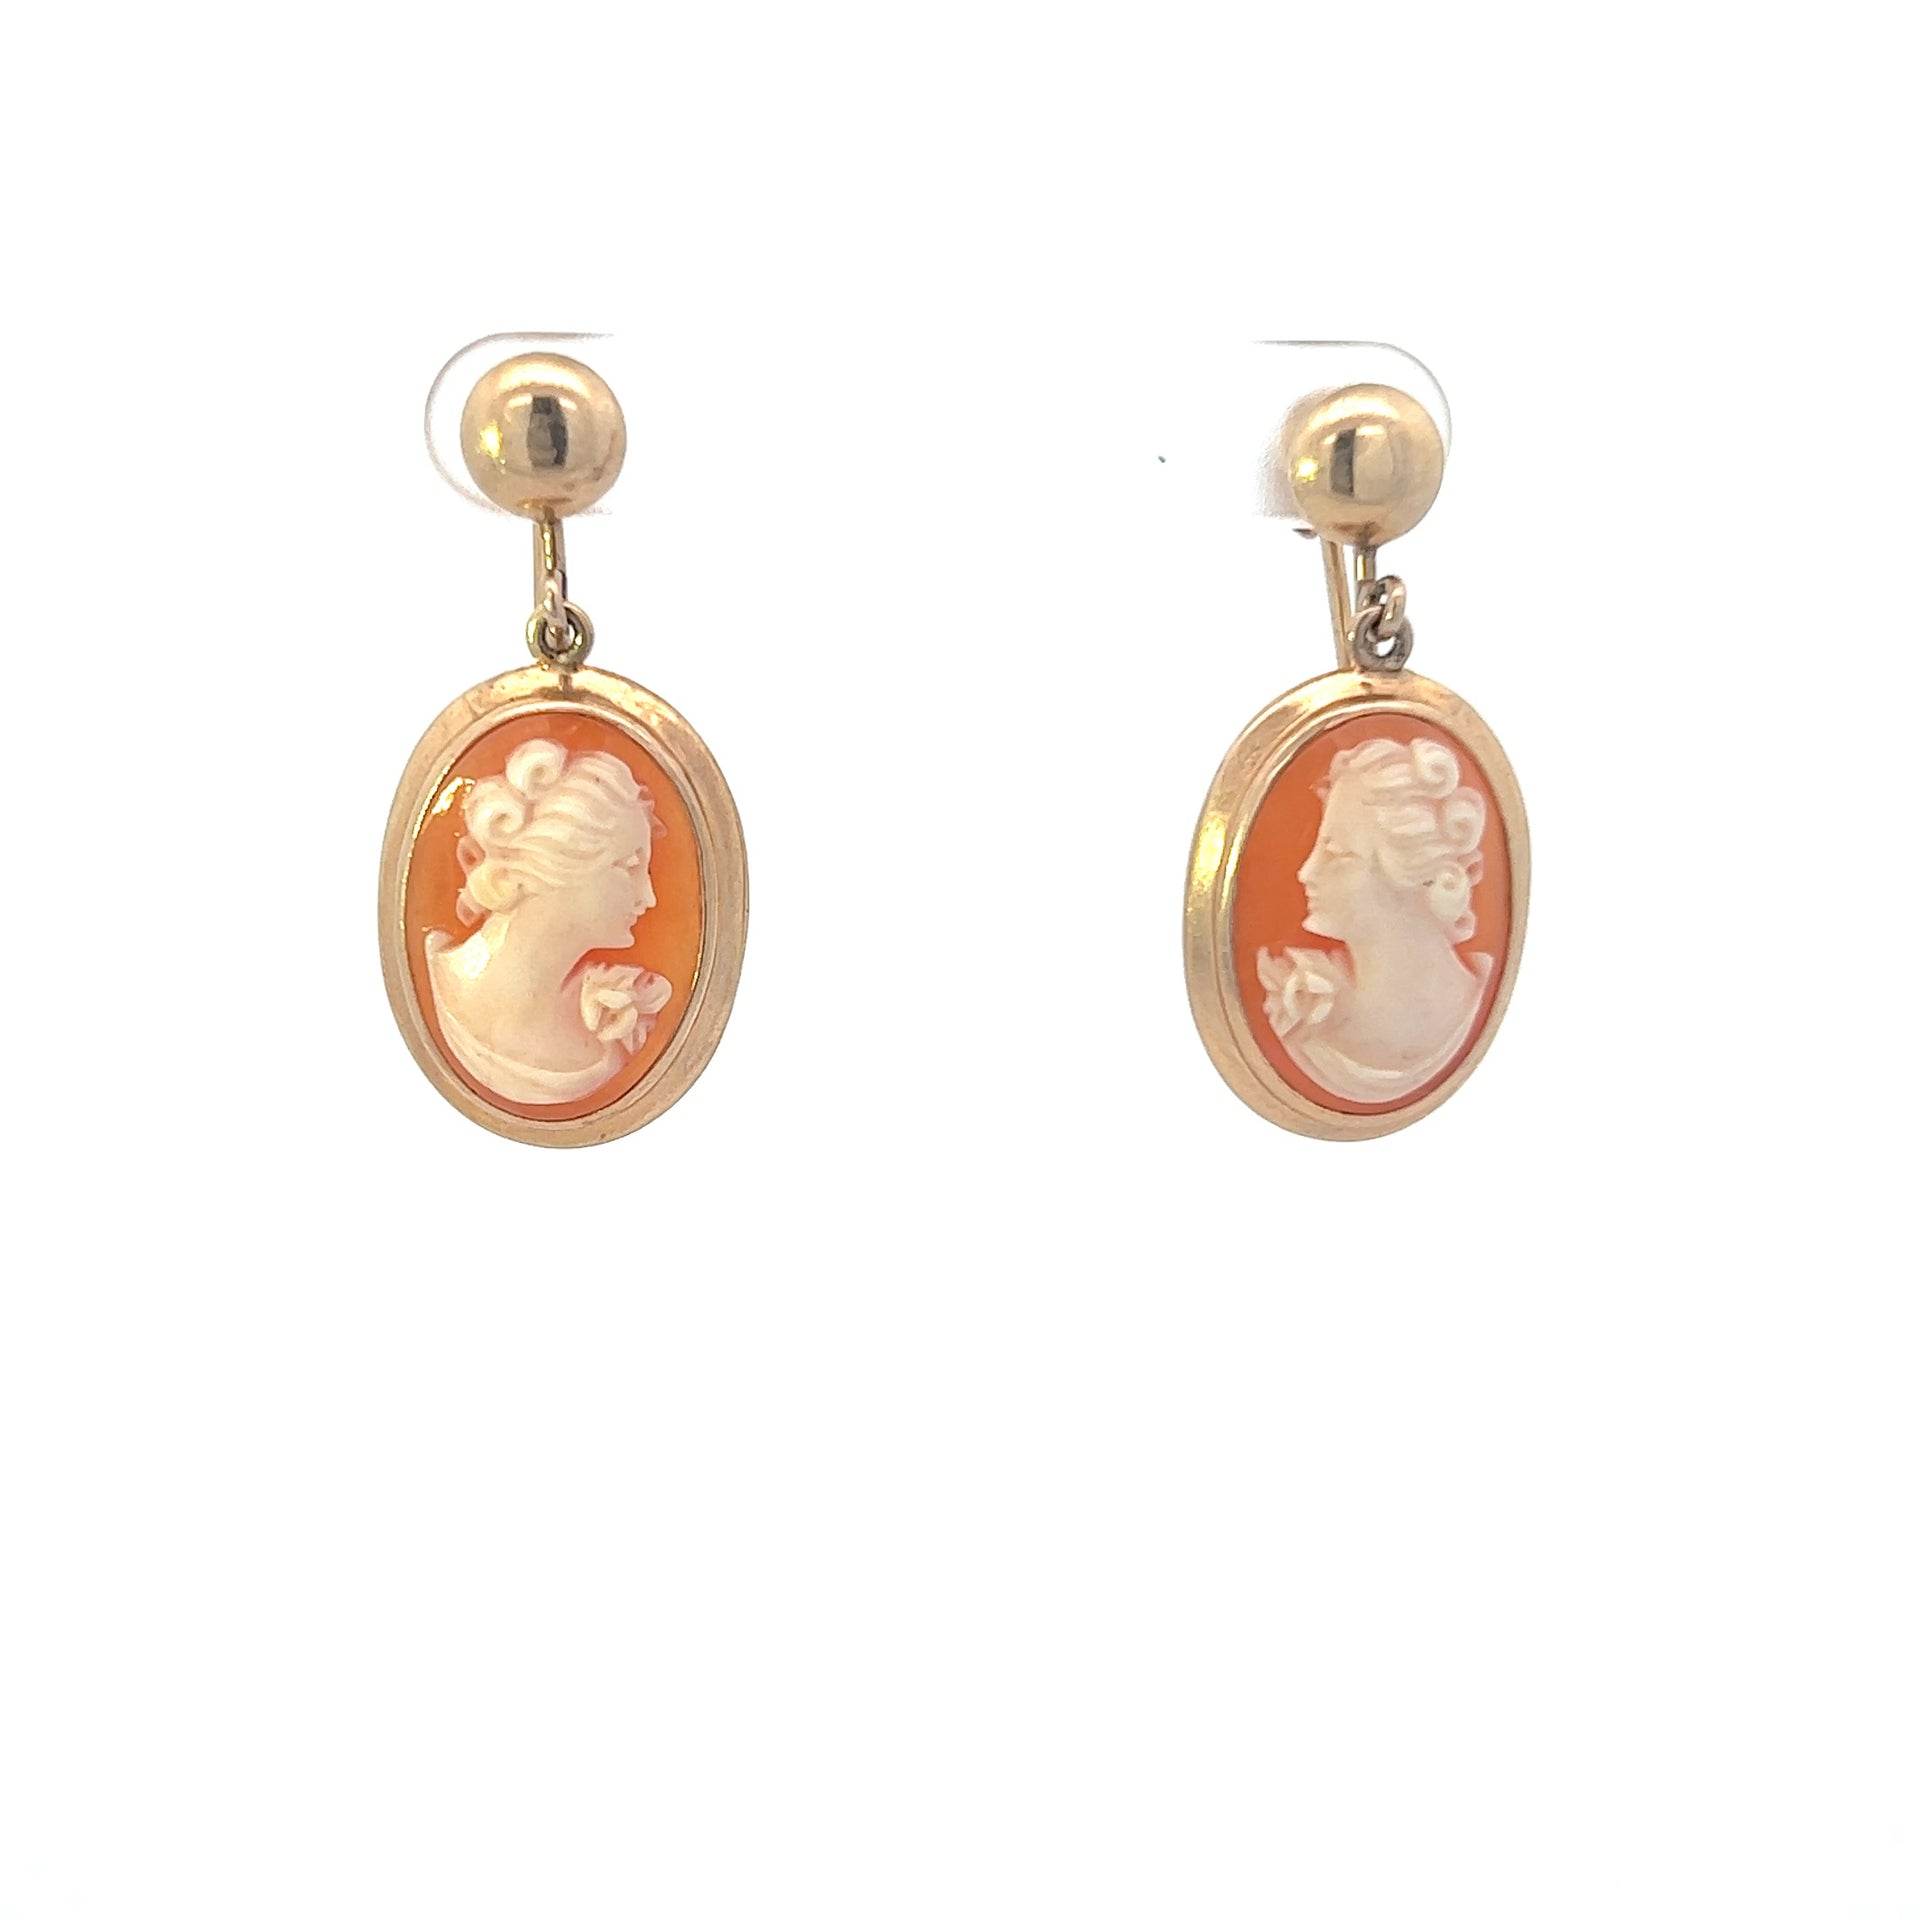 ANTIQUE 14KT YELLOW GOLD PORTRAIT CAMEO EARRINGS